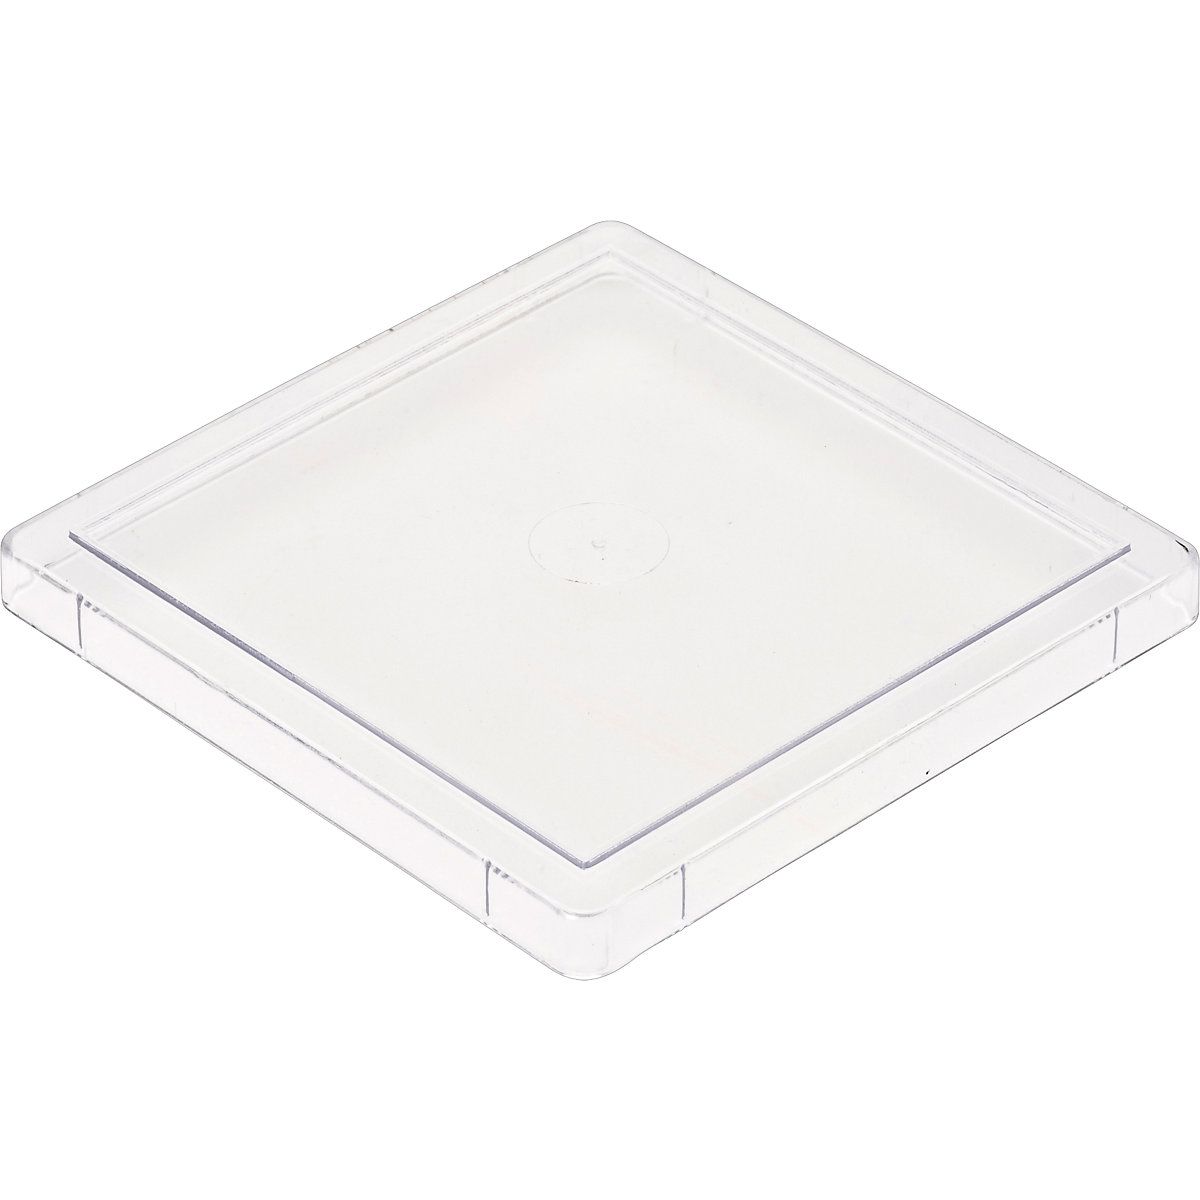 Lid for insert box, pack of 50, for box dims. LxW 99 x 99 mm-2